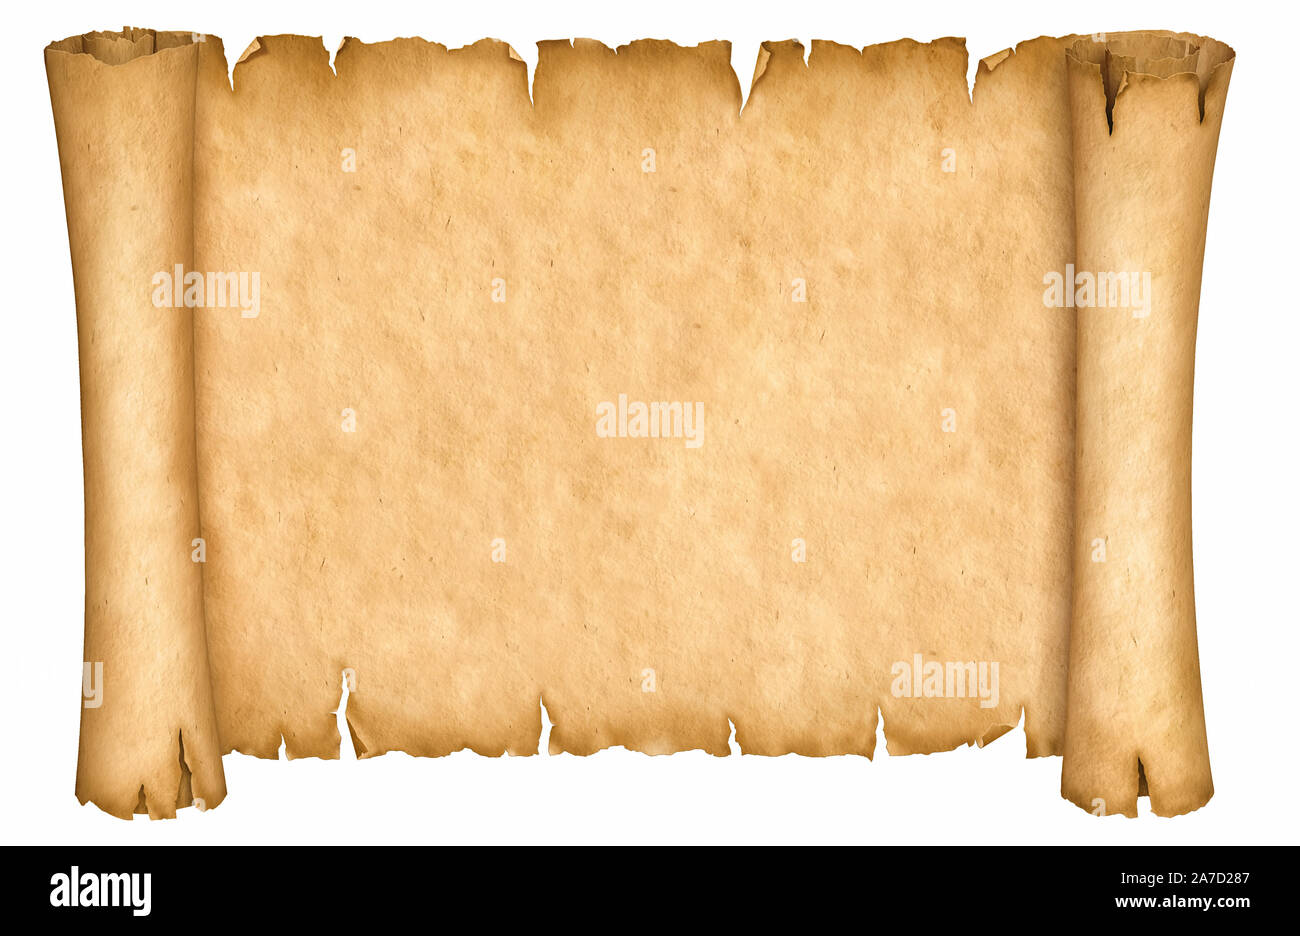 Old paper manuscript or papyrus scroll horizontal oriented isolated on white background. Stock Photo